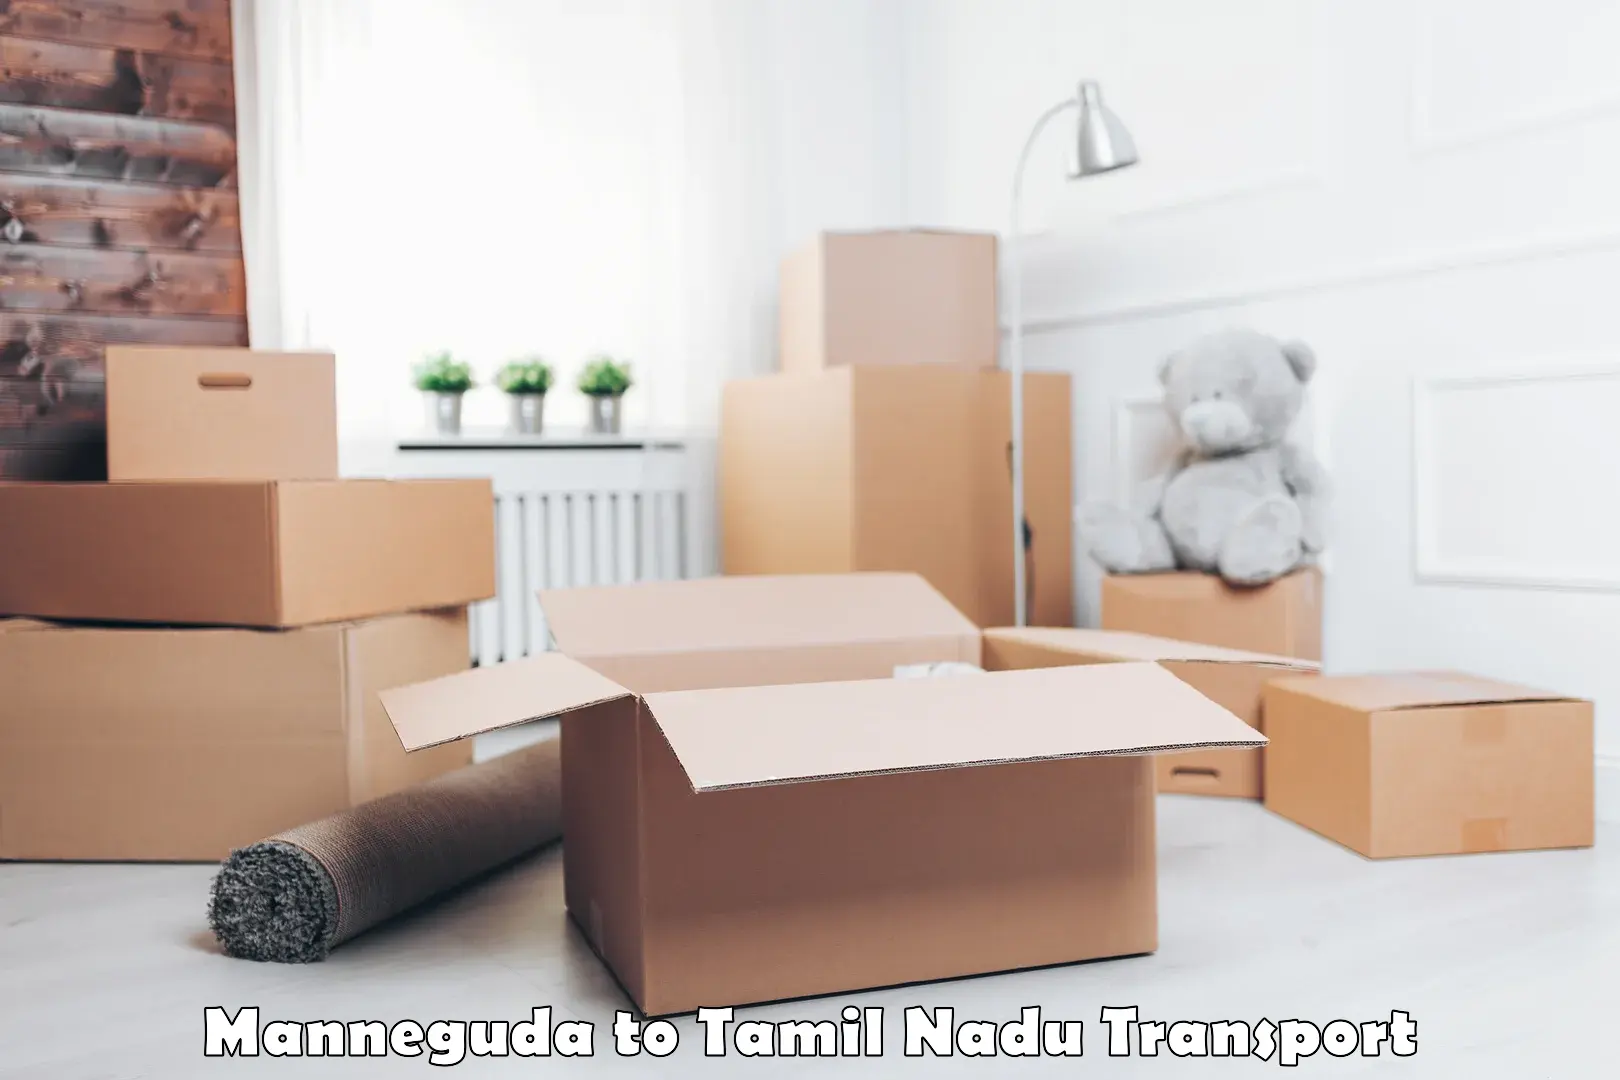 Luggage transport services in Manneguda to Tamil Nadu